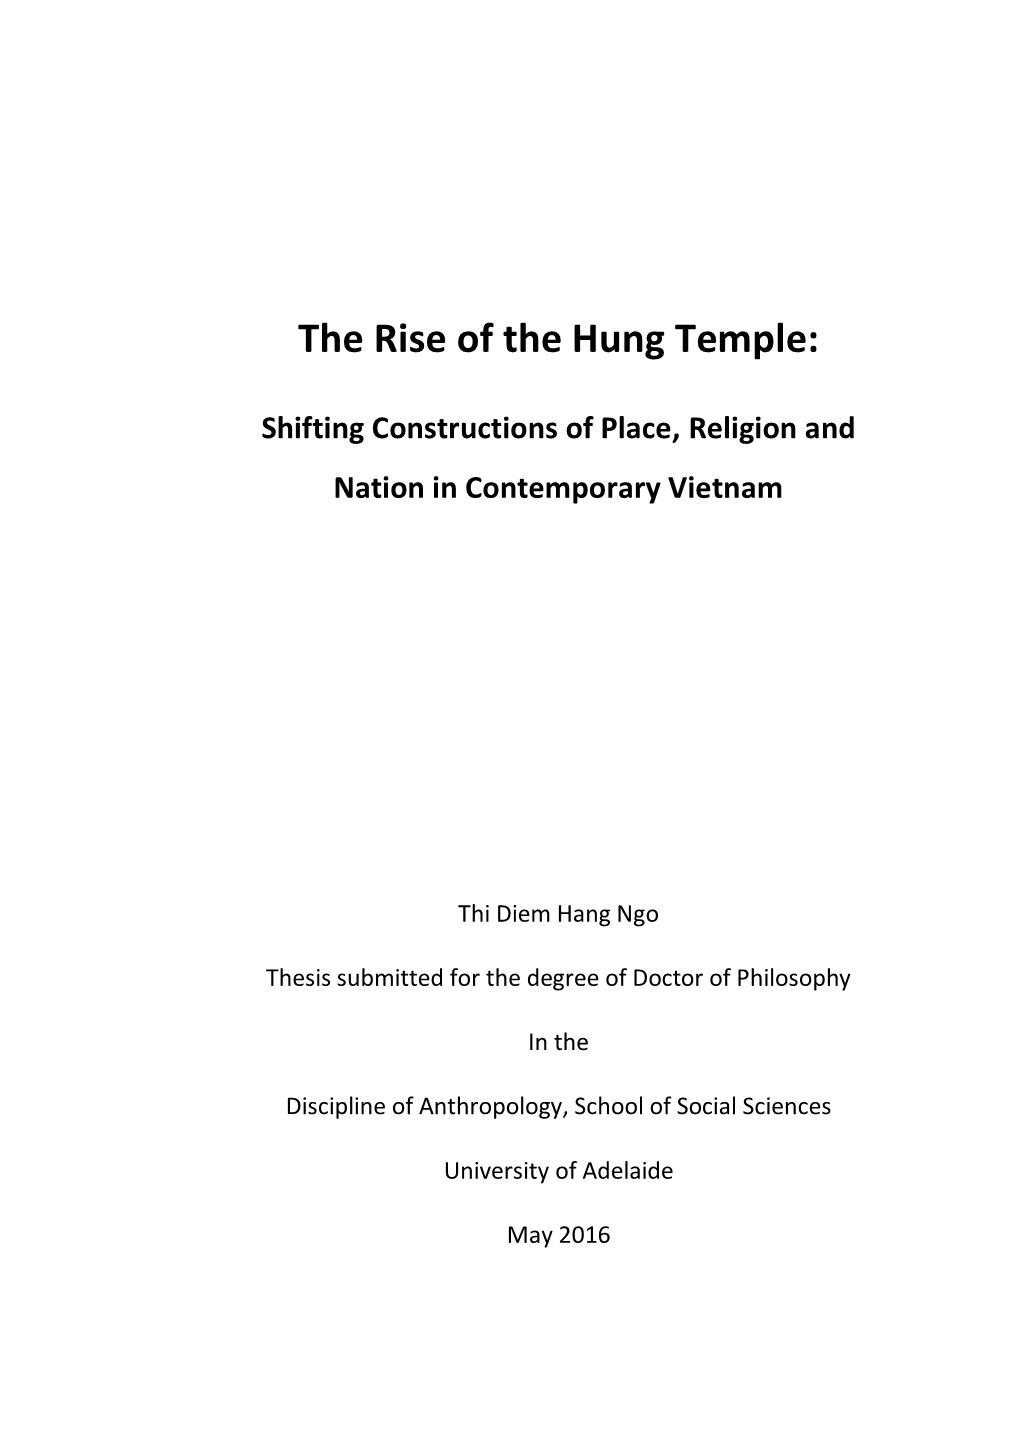 The Rise of the Hung Temple